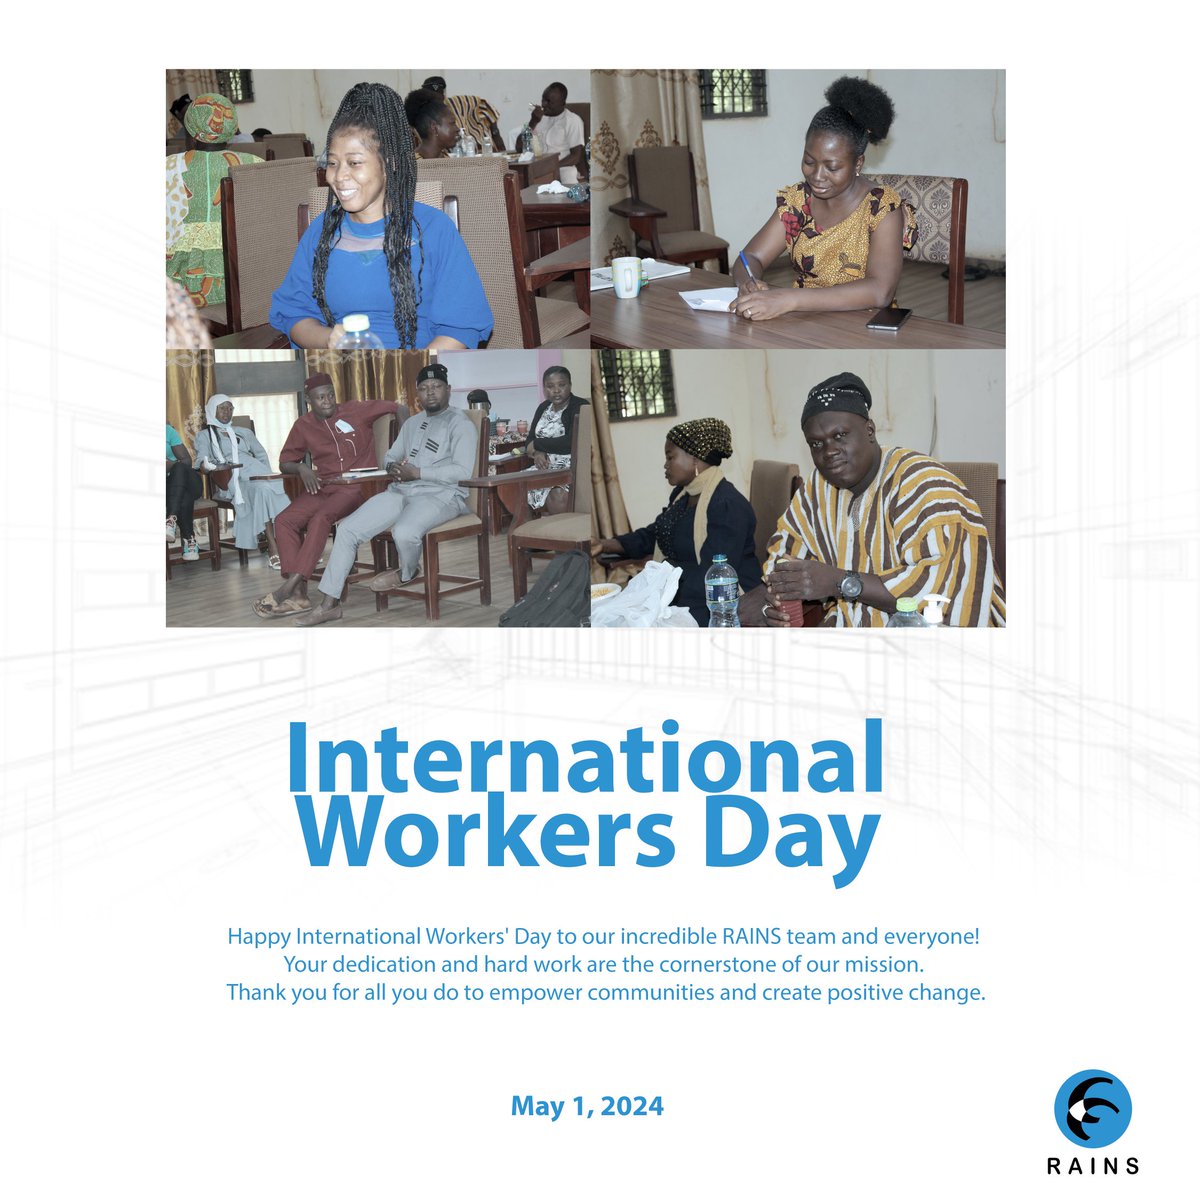 Happy International Workers' Day to our incredible RAINS team and everyone! Your dedication and hard work are the cornerstone of our mission. Thank you for all you do to empower communities and create positive change. #WorkersDay #TeamRAINS @followers